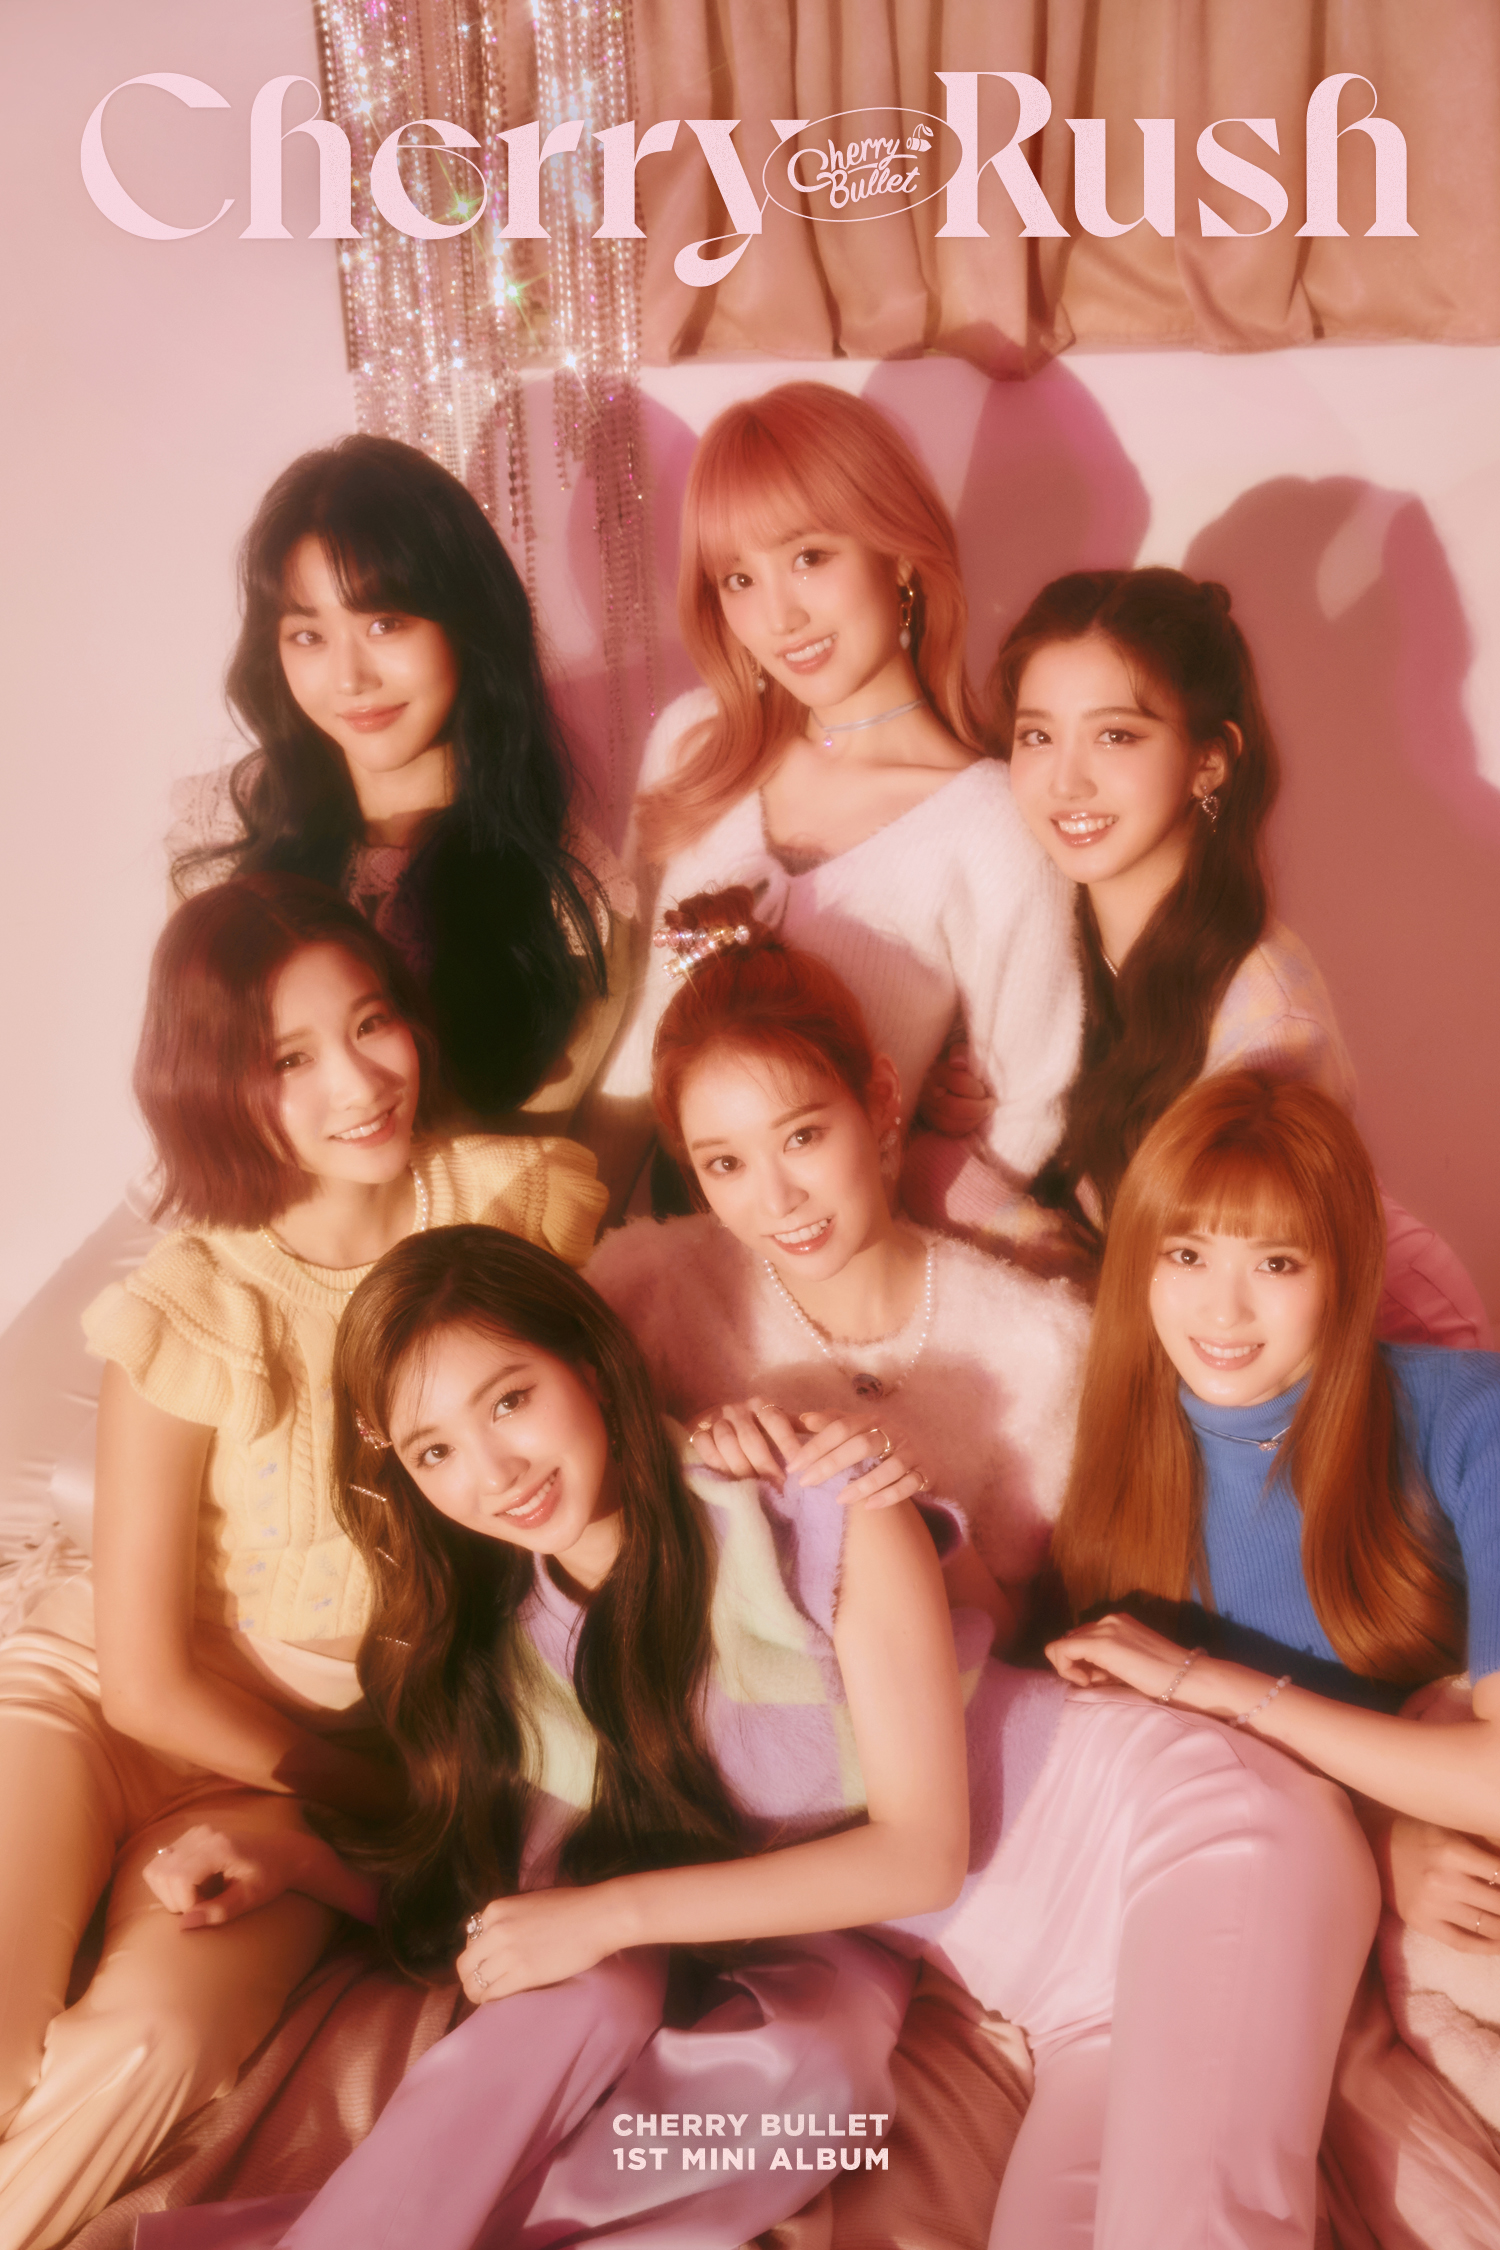 [INTERVIEW] The Seoul Story Interviews Cherry Bullet